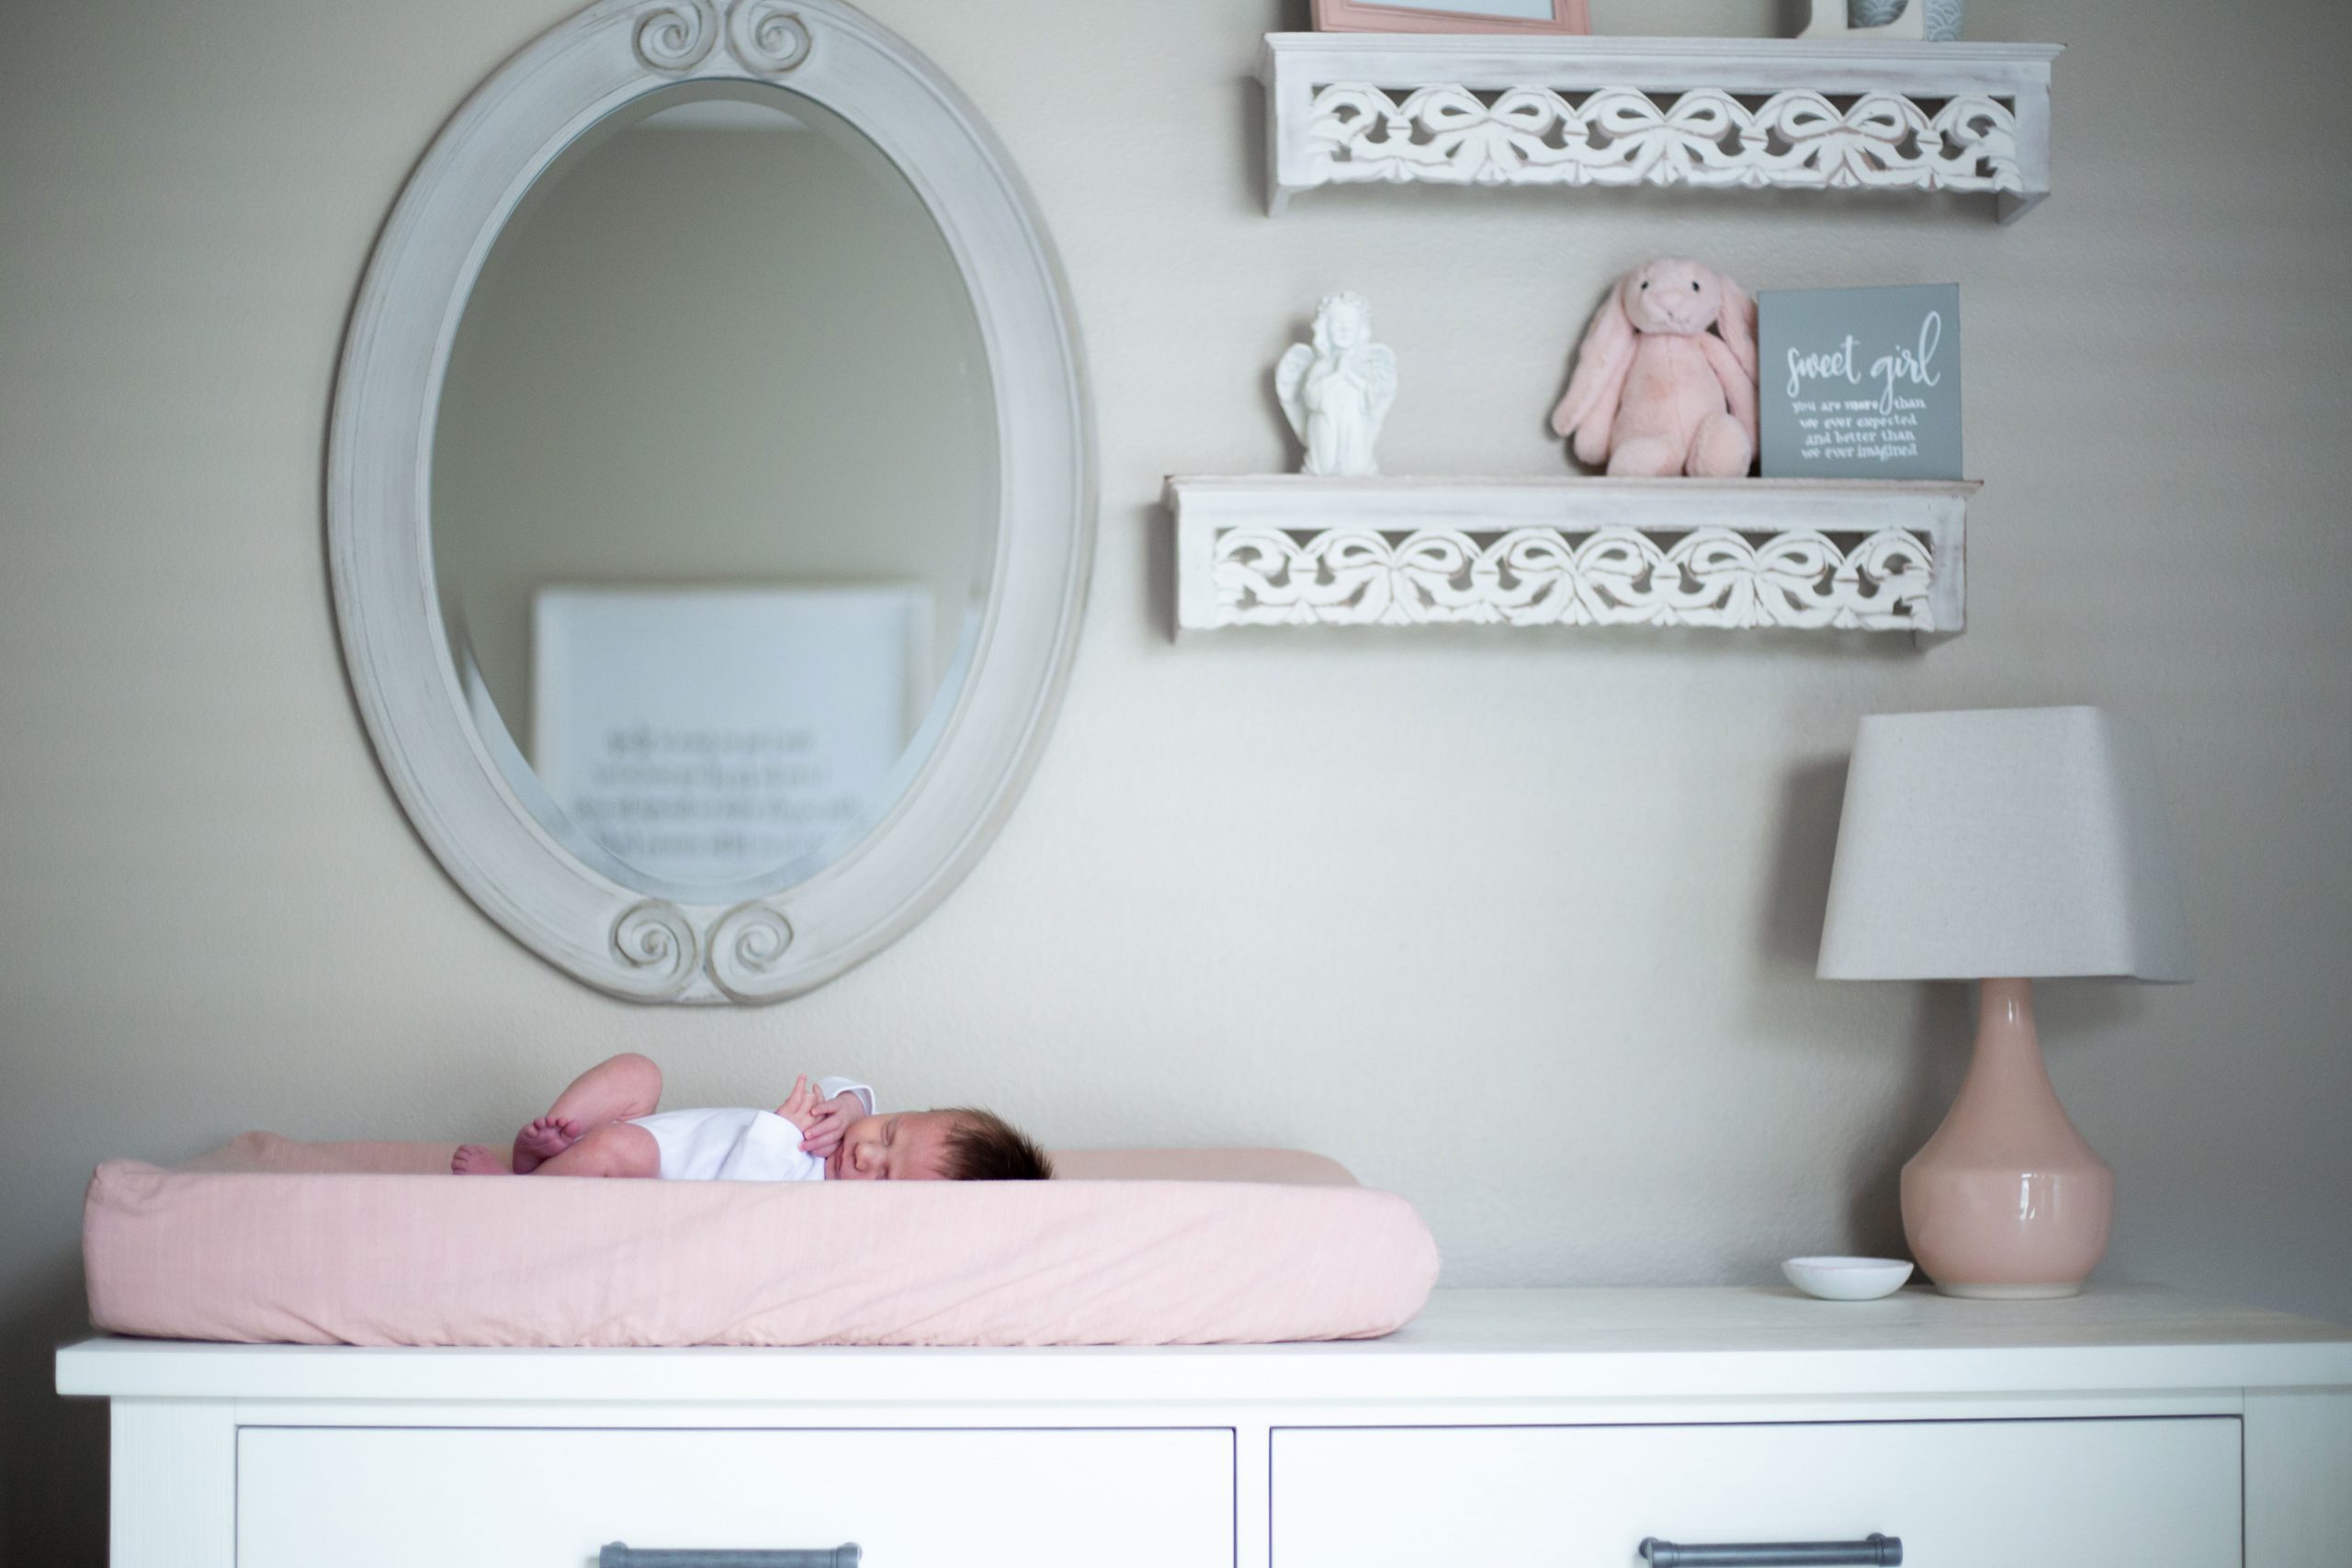 in-home lifestyle newborn photography